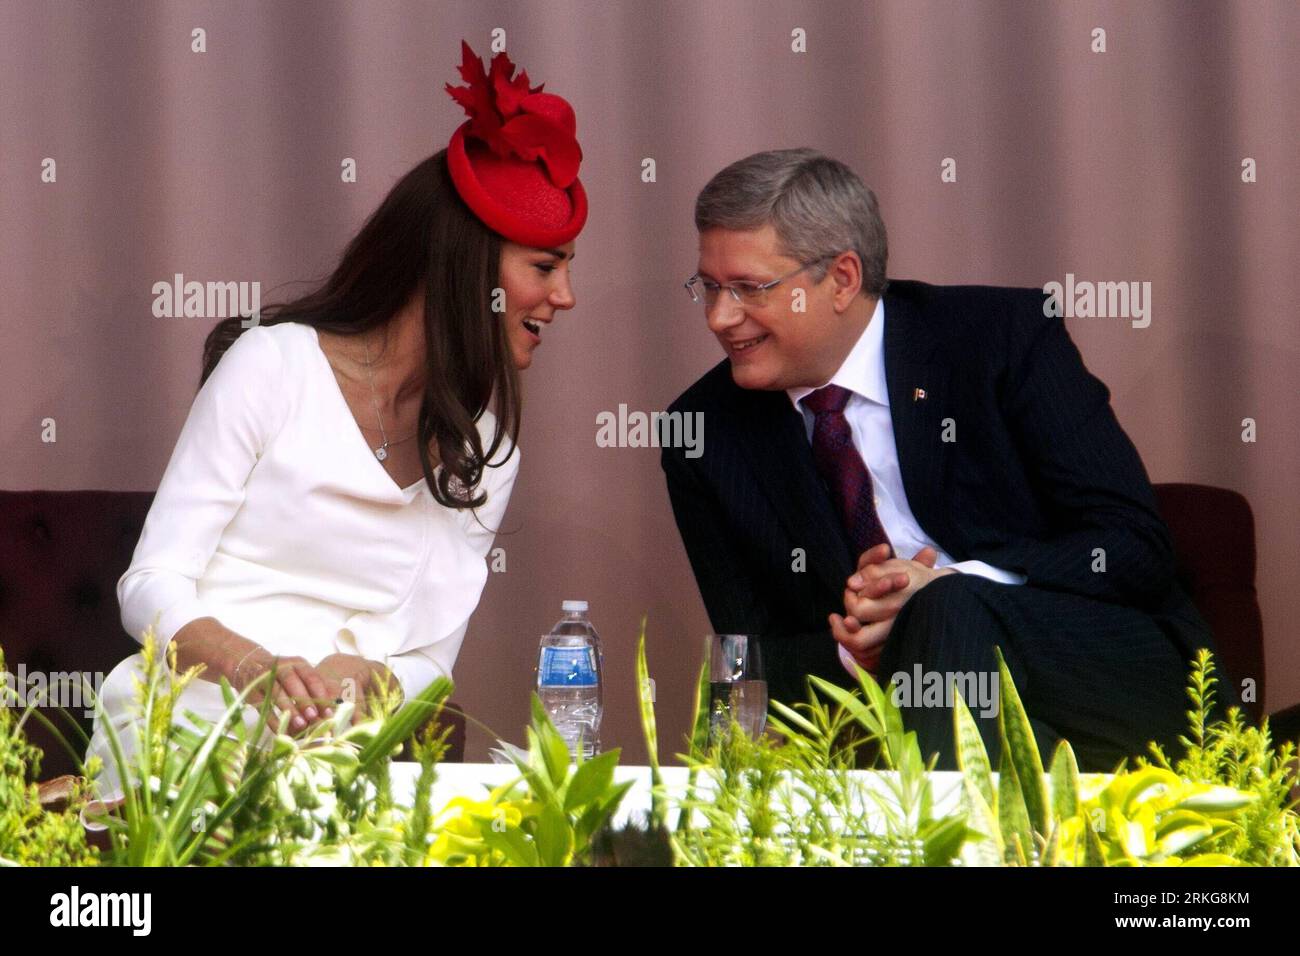 Bildnummer: 55565301  Datum: 01.07.2011  Copyright: imago/Xinhua (110702)-- OTTAWA, July 2, 2011 (Xinhua) -- Canada s Prime Minister Stephen Harper talks to Britain s Duchess of Cambridge Kate during the 144th Canada Day celebrations on Parliament Hill in Ottawa, Canada, on July 1, 2011. The Royal couple is on a nine-day official visit to Canada, their first overseas trip since being married.(Xinhua/Christopher Pike)(zl) CANADA-CANADA DAY-CELEBRATION PUBLICATIONxNOTxINxCHN People Entertainment Adel GBR Königshaus Kate xda x0x premiumd Middleton 2011 quer Catherine    Bildnummer 55565301 Date 0 Stock Photo